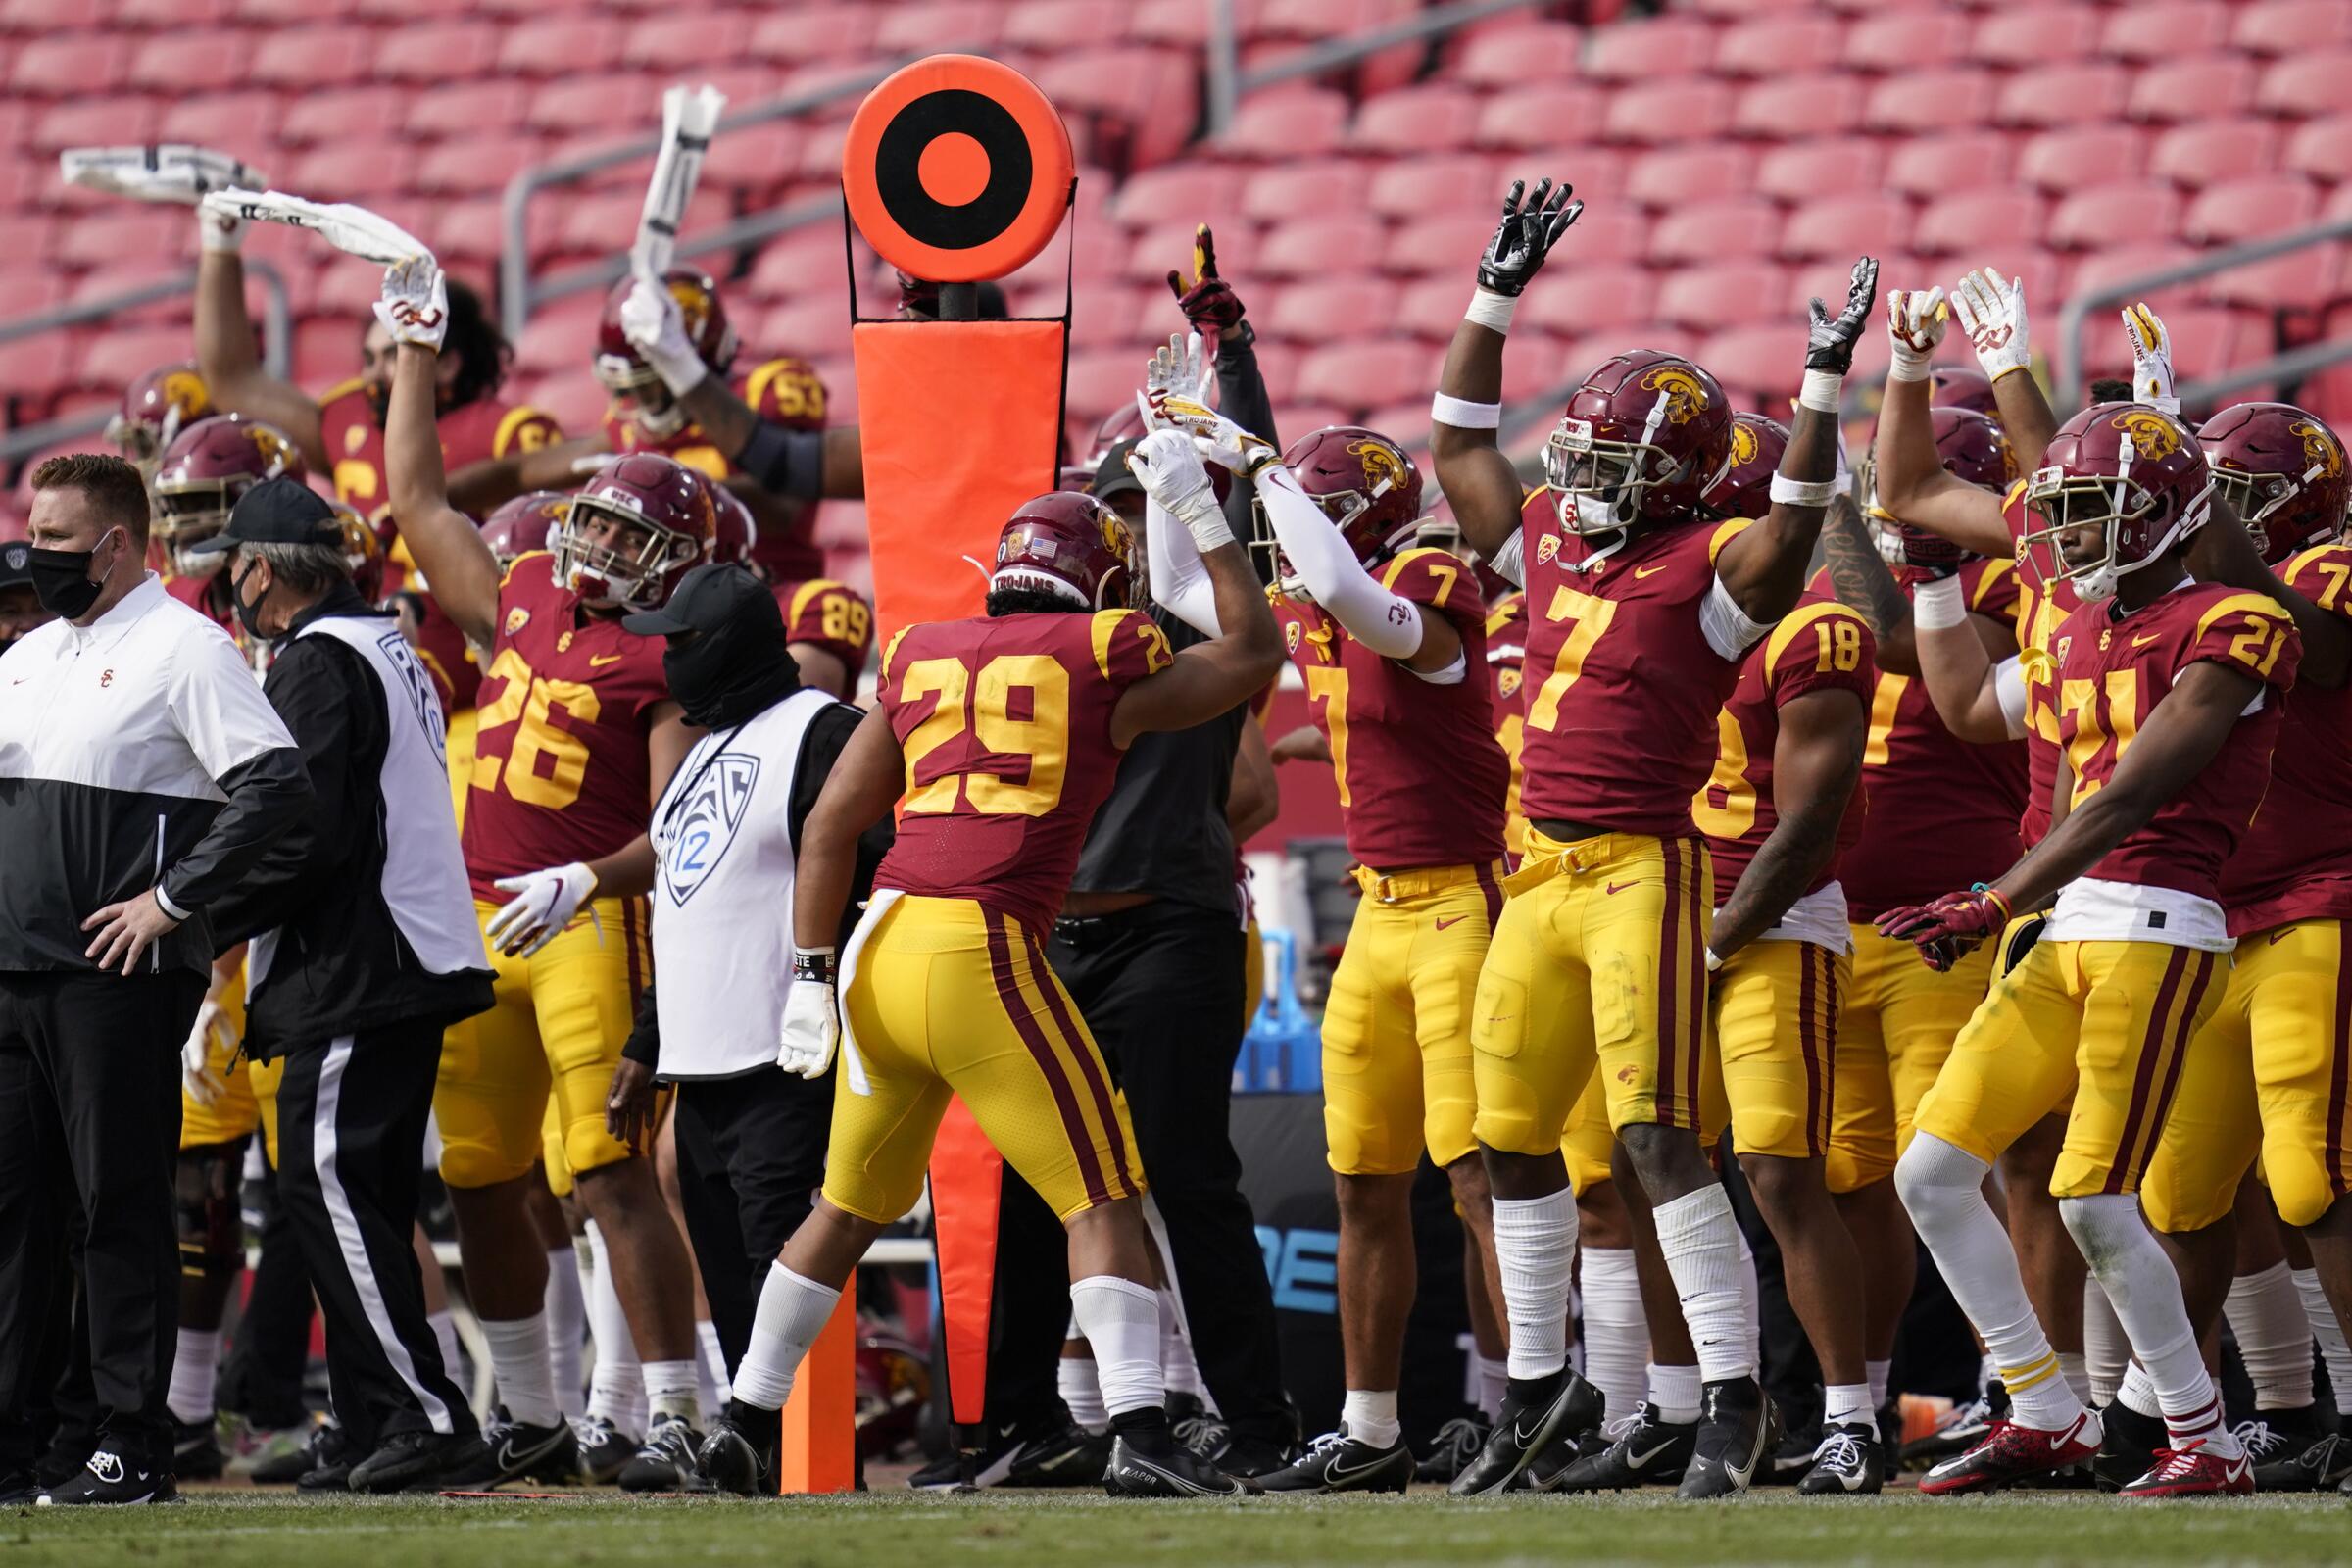 USC players celebrate on the sideline during the second half of the Trojans' 28-27 win over Arizona State on Saturday.